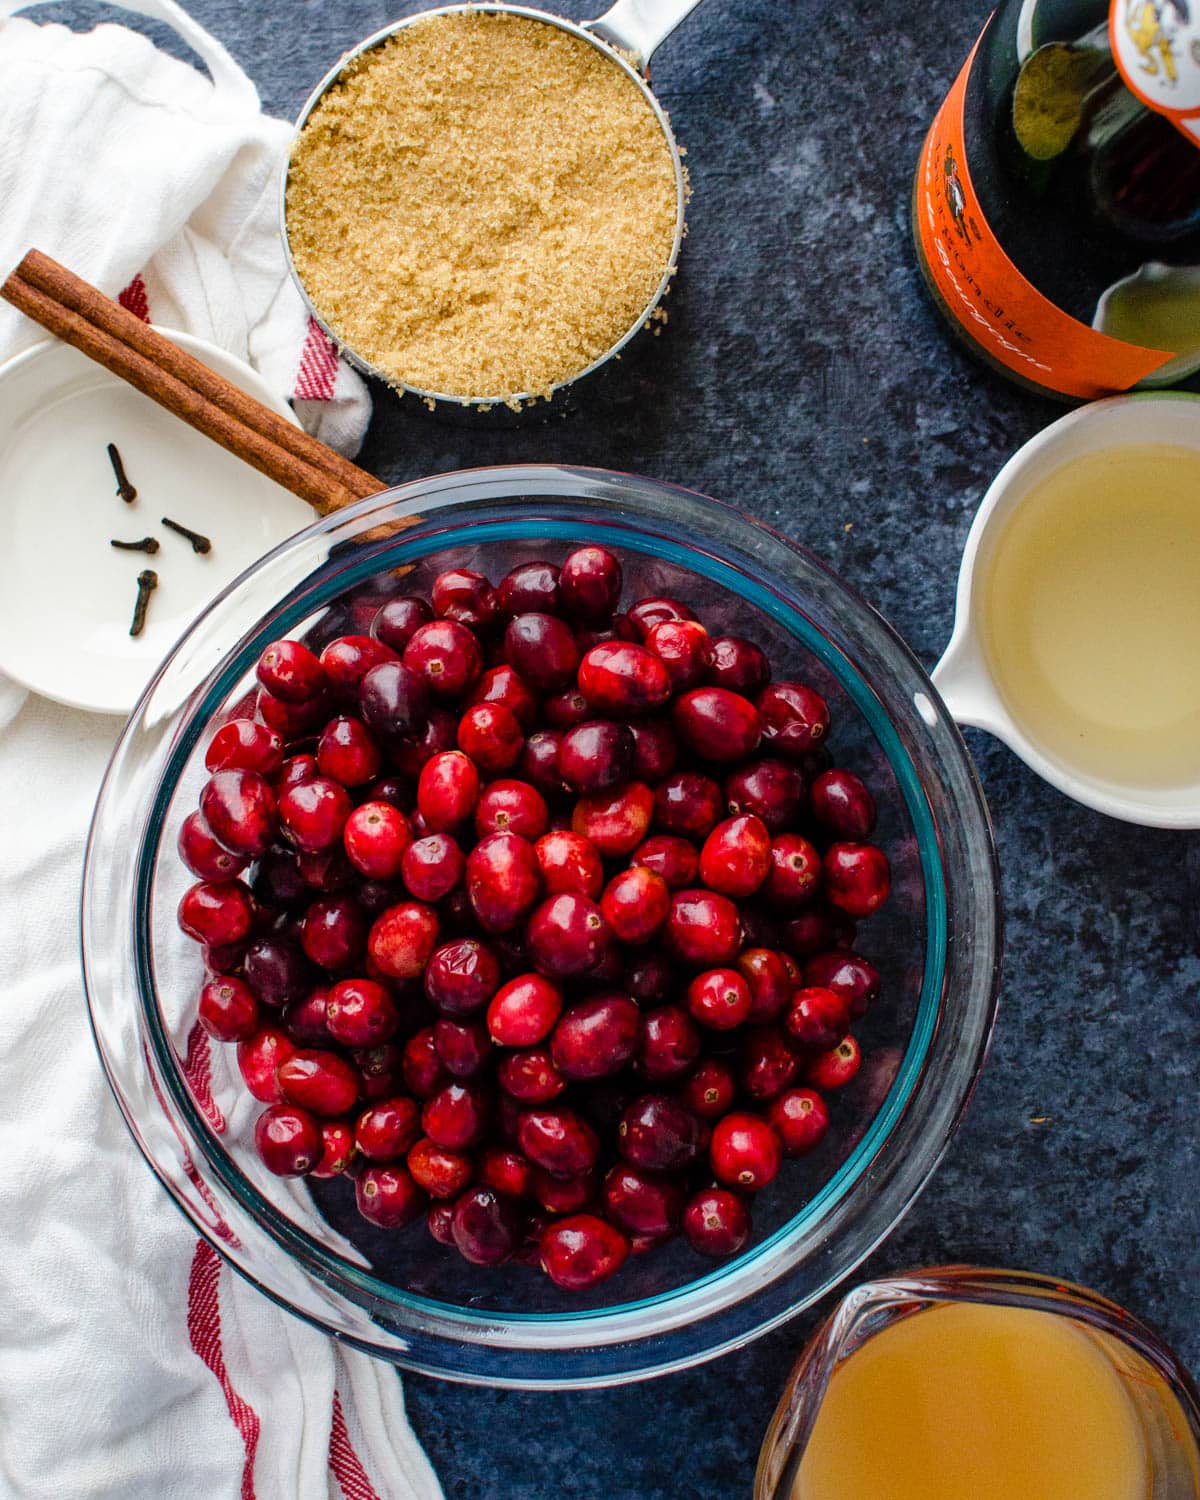 A bowl of cranberries with brown sugar, cloves, cinnamon, wine and cider.